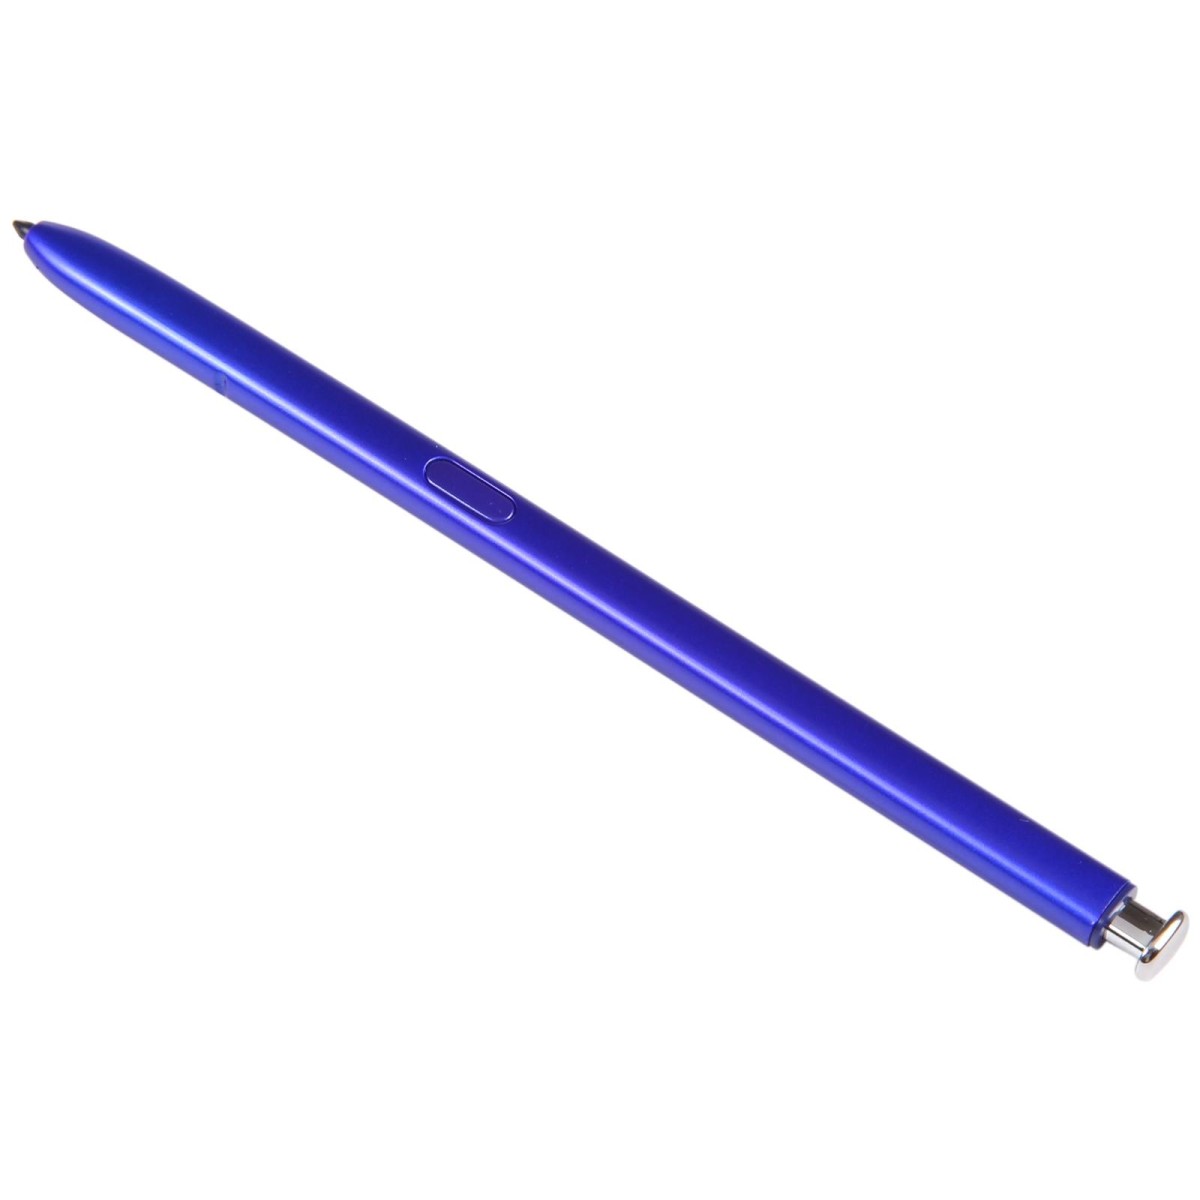 For Samsung Galaxy Note10 SM-970F Screen Touch Pen, Bluetooth Not Supported (Purple)